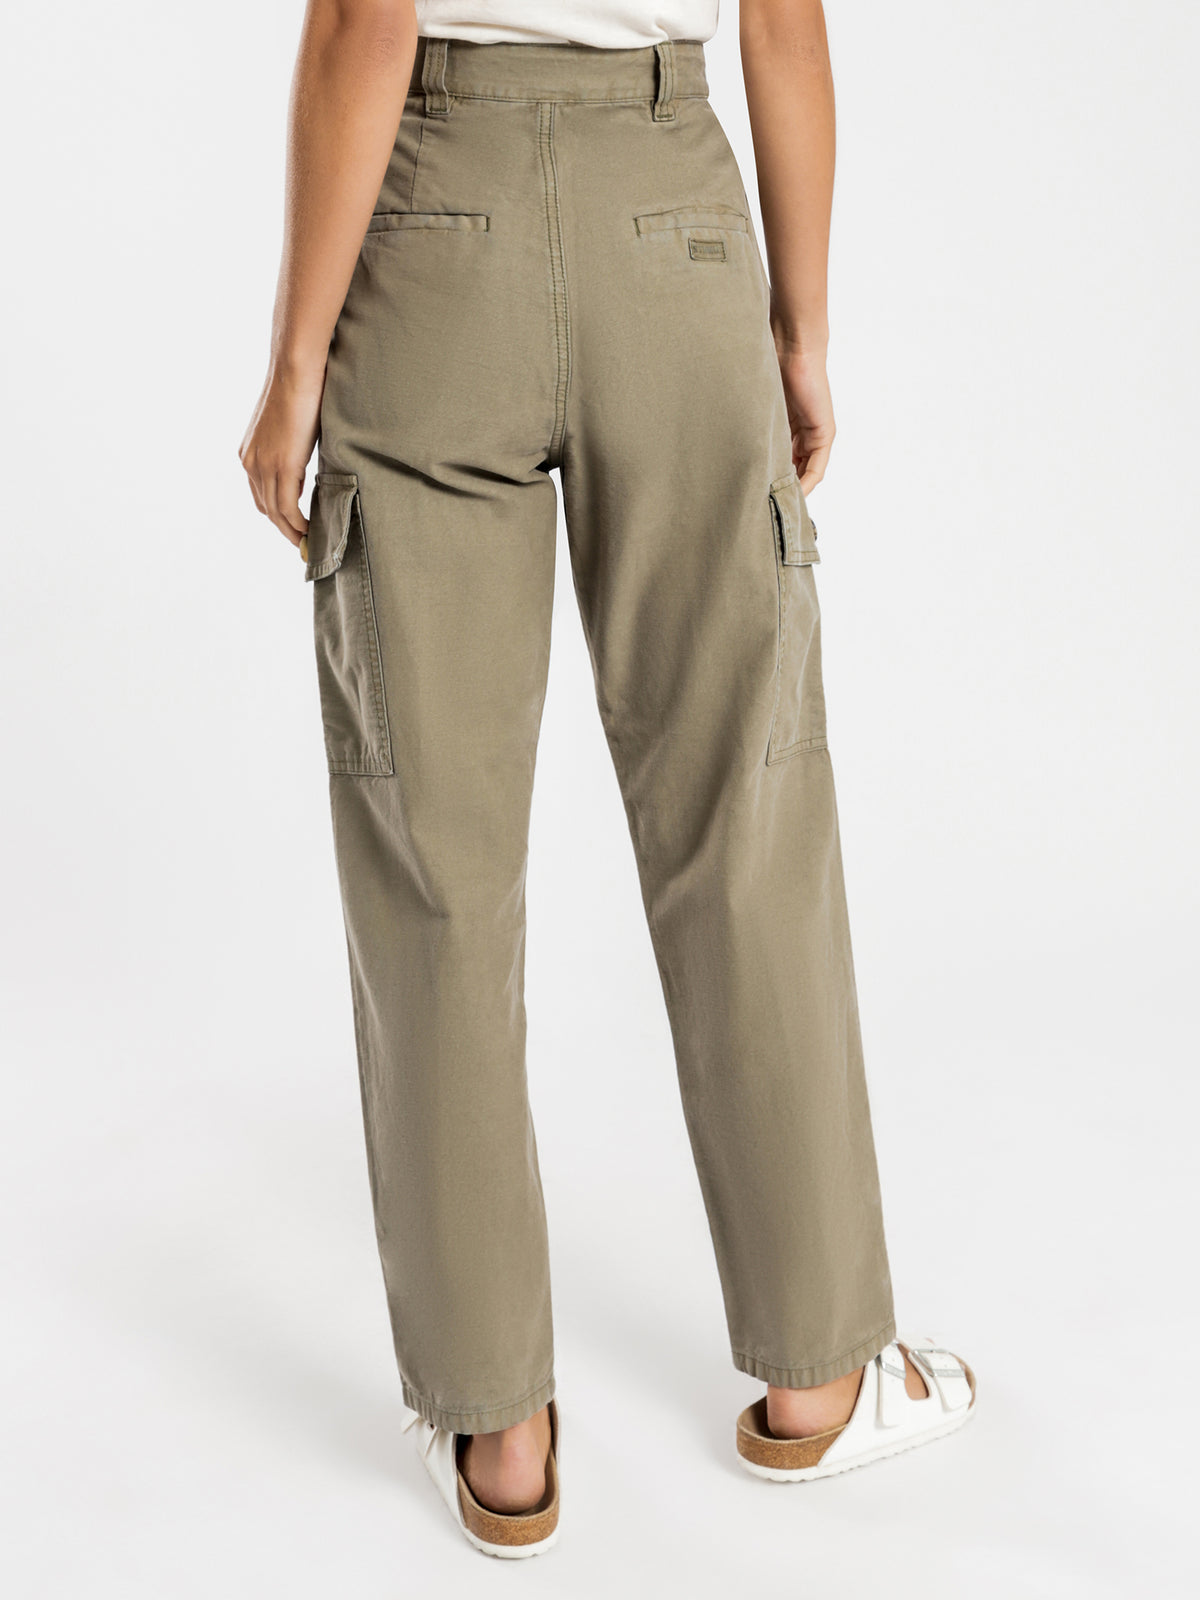 Cargo Pants in Army Green